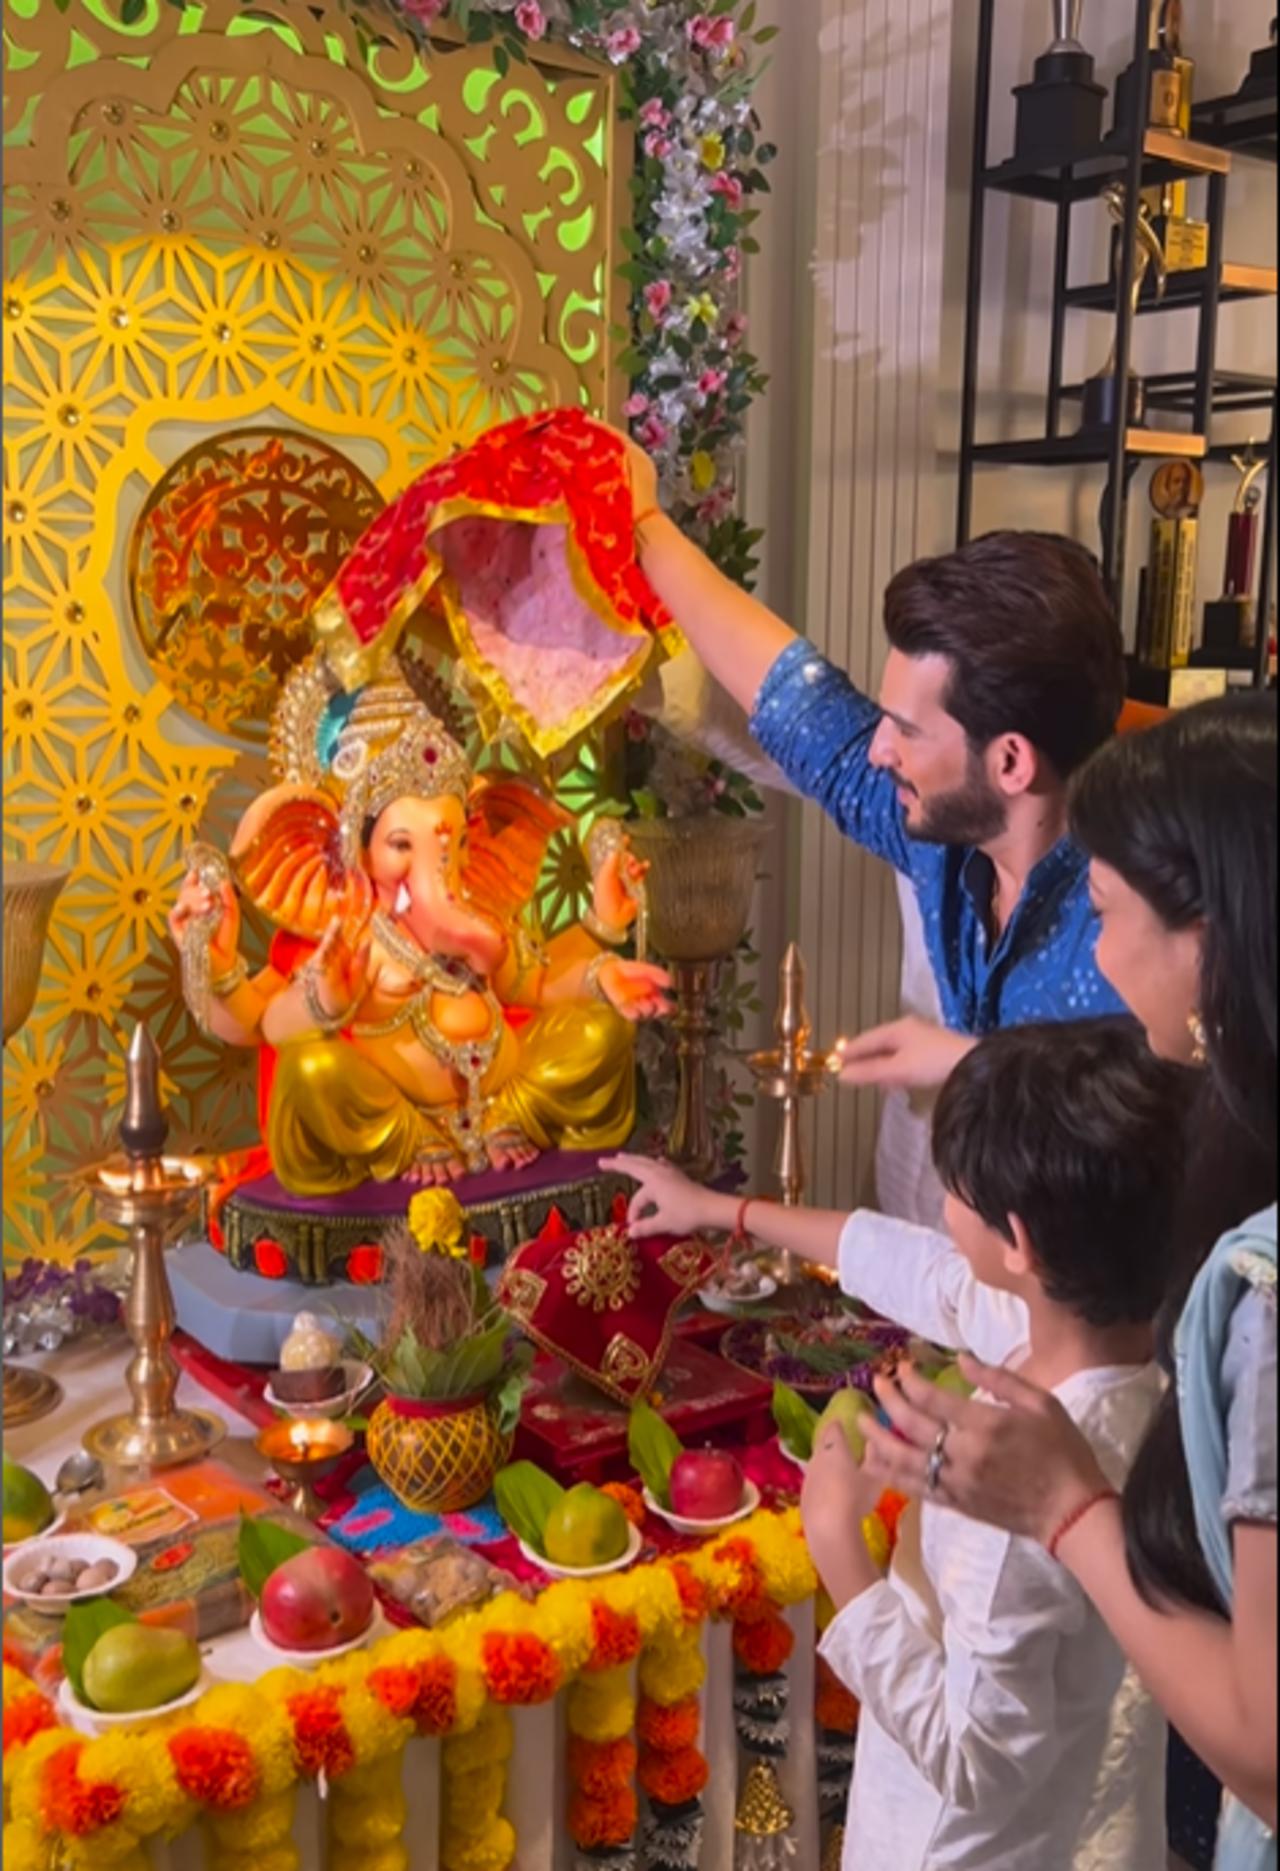 Arjun Bijlani hosts Ganpati every year. The actor offered prayers and celebrated the festival with his family and friends